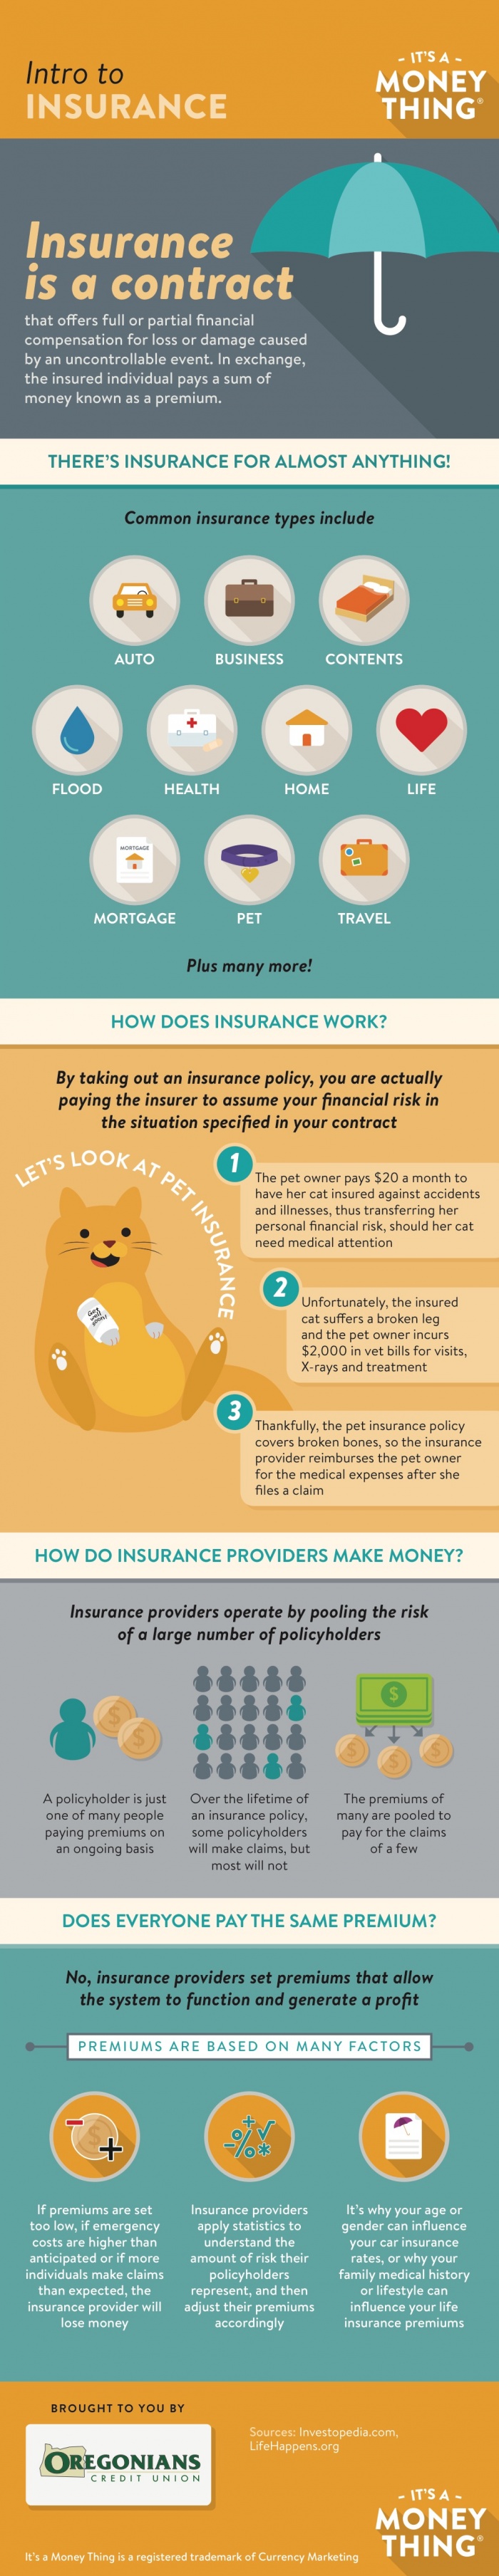 Intro to Insurance Infographic